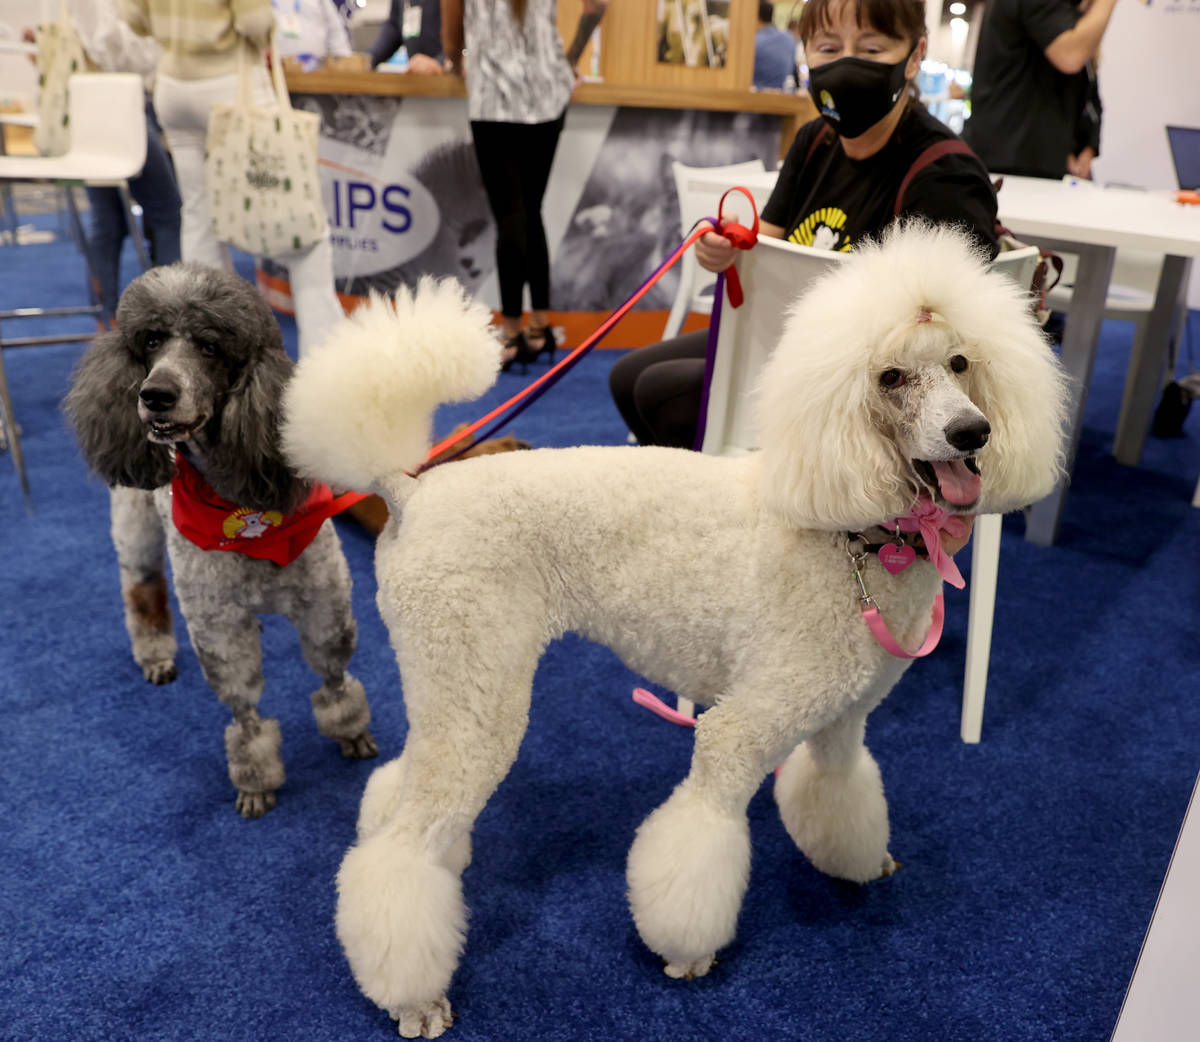 Susan Raybould with Keto Pet Food in Los Angeles takes a break with her rescue poodles Coconut, ...